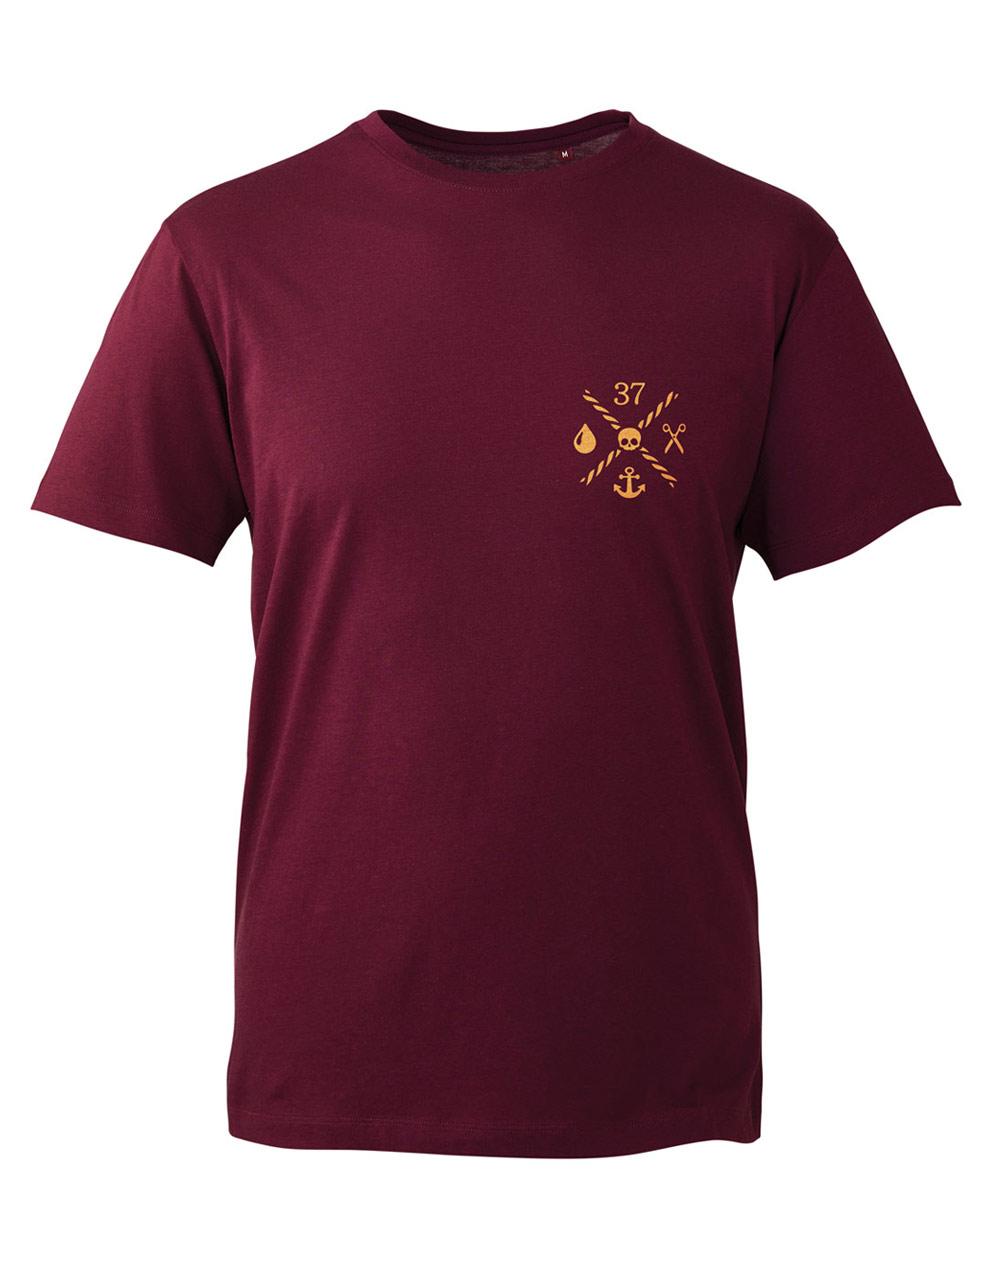 Classic unisex T-shirt in burgundy with gold logo on the chest